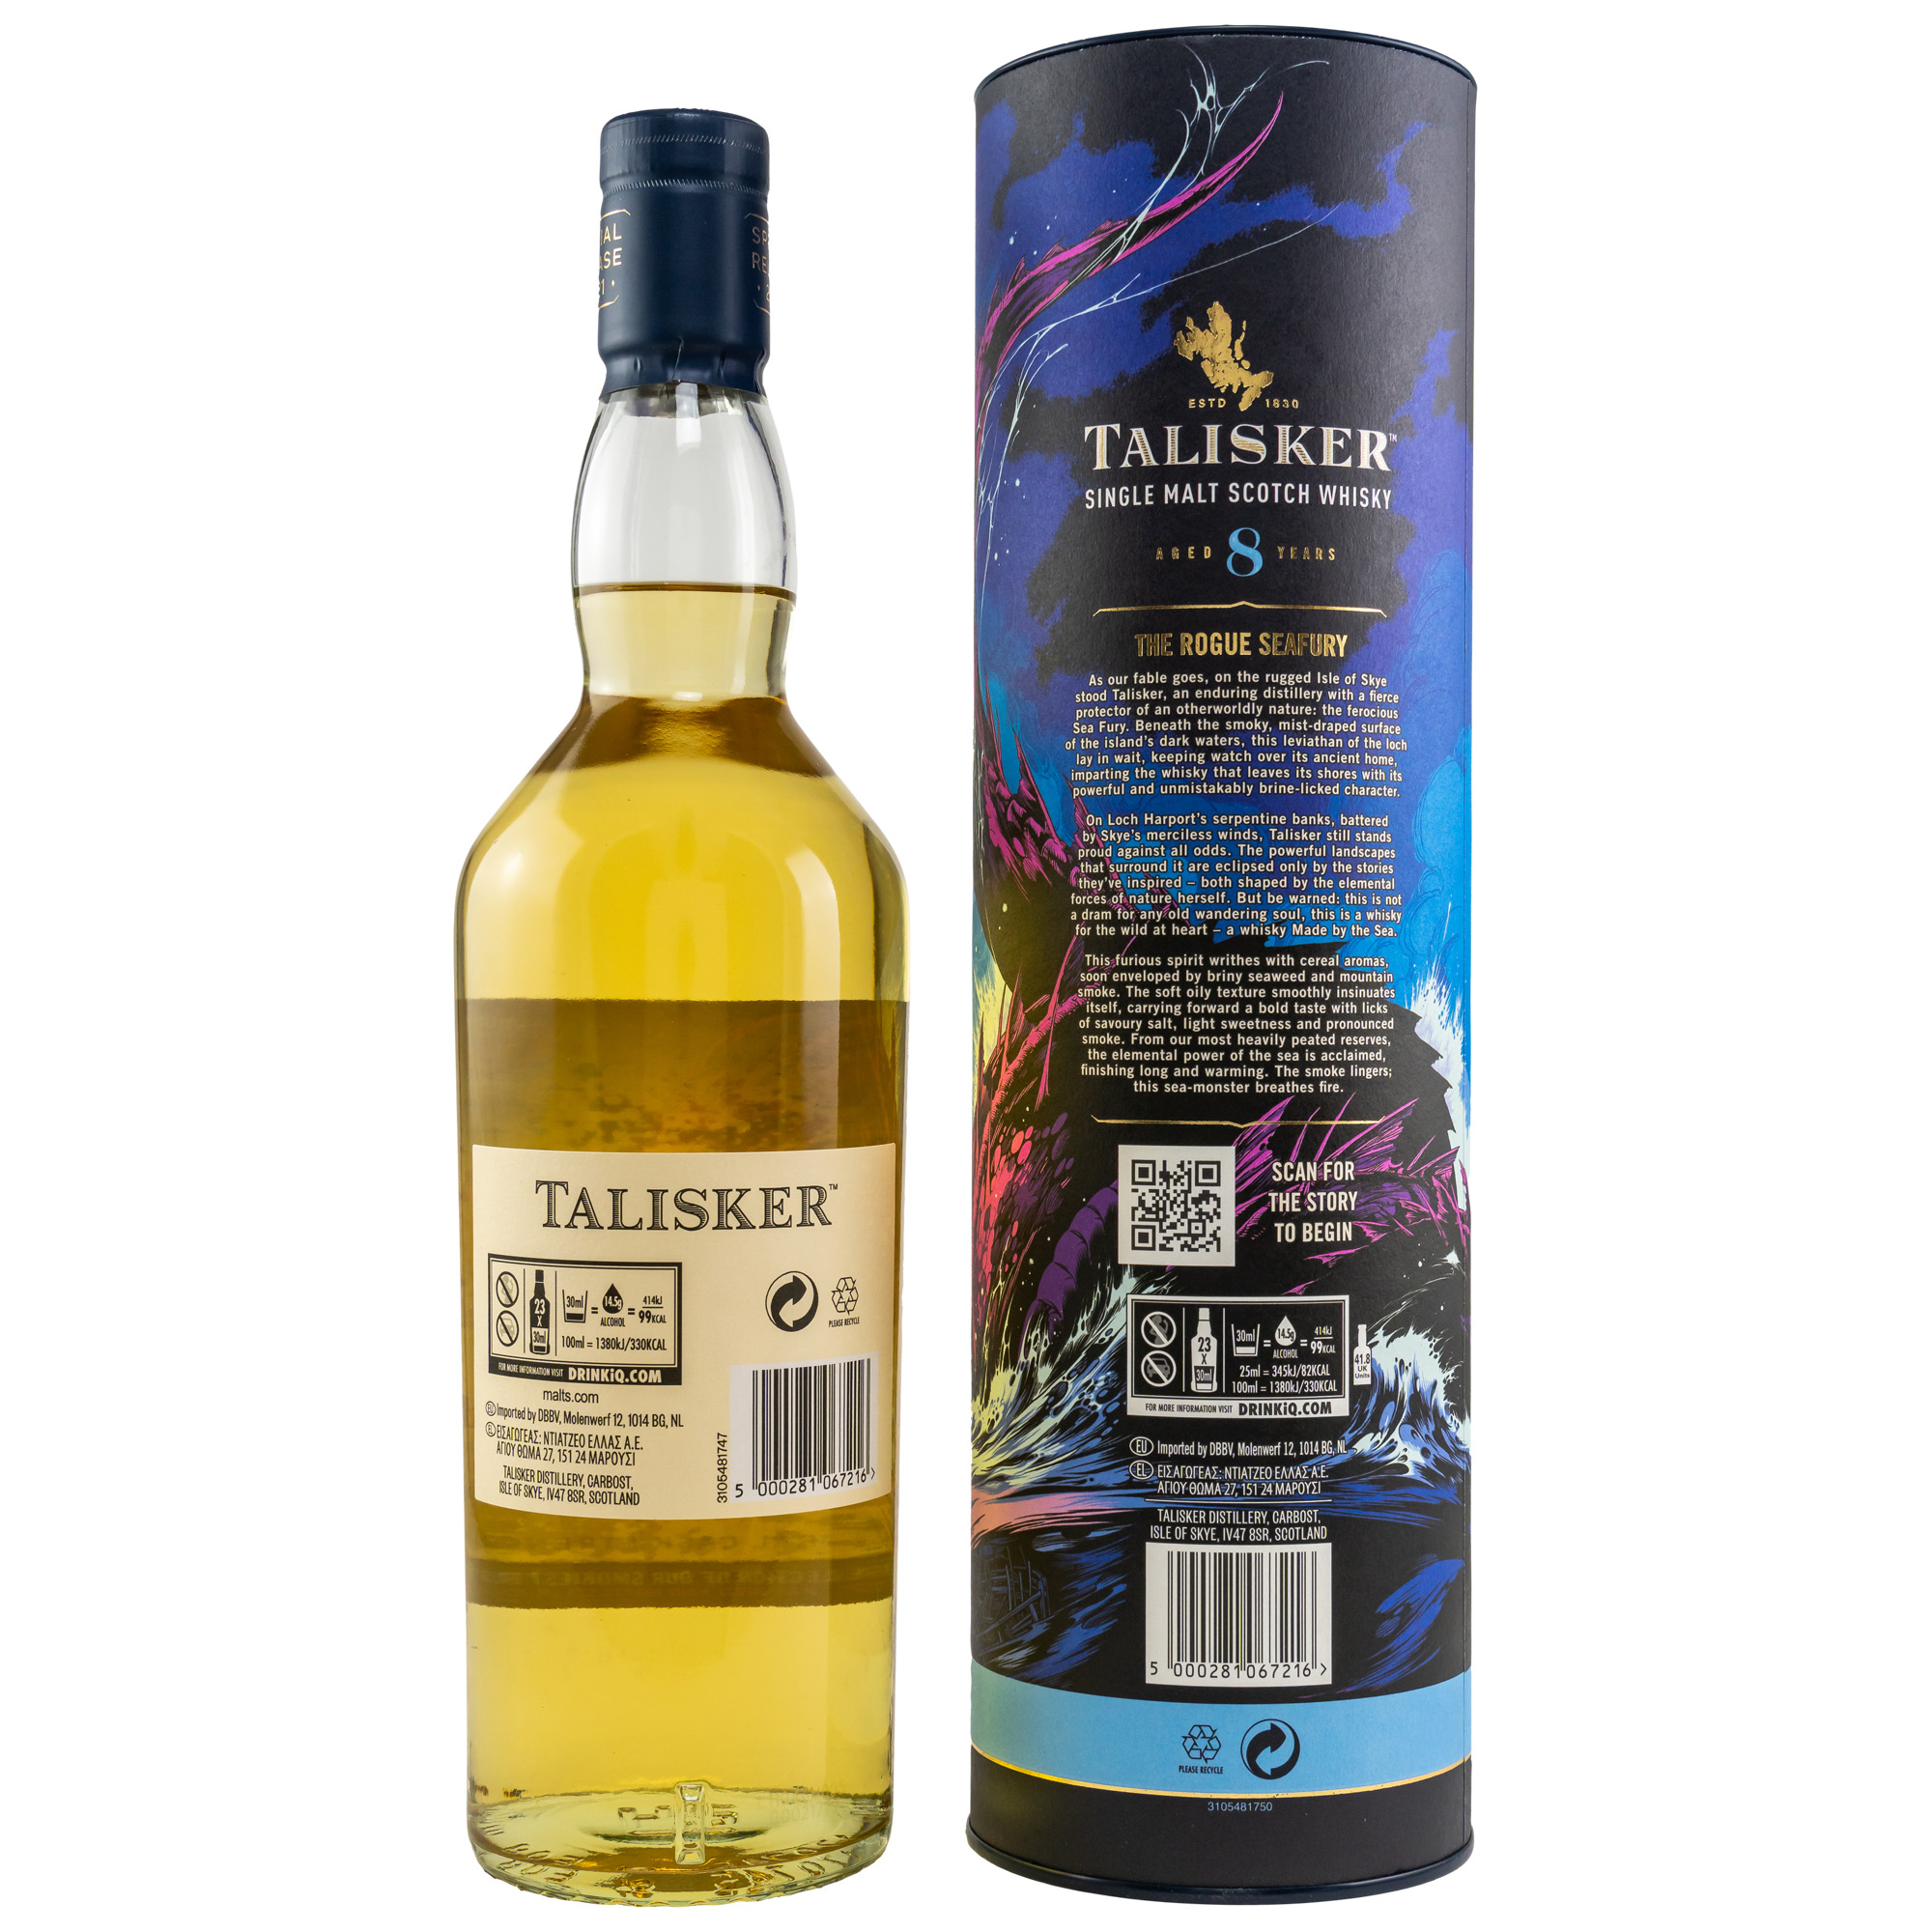 Talisker 8 y.o. - Special Releases 2021 - 59,7%